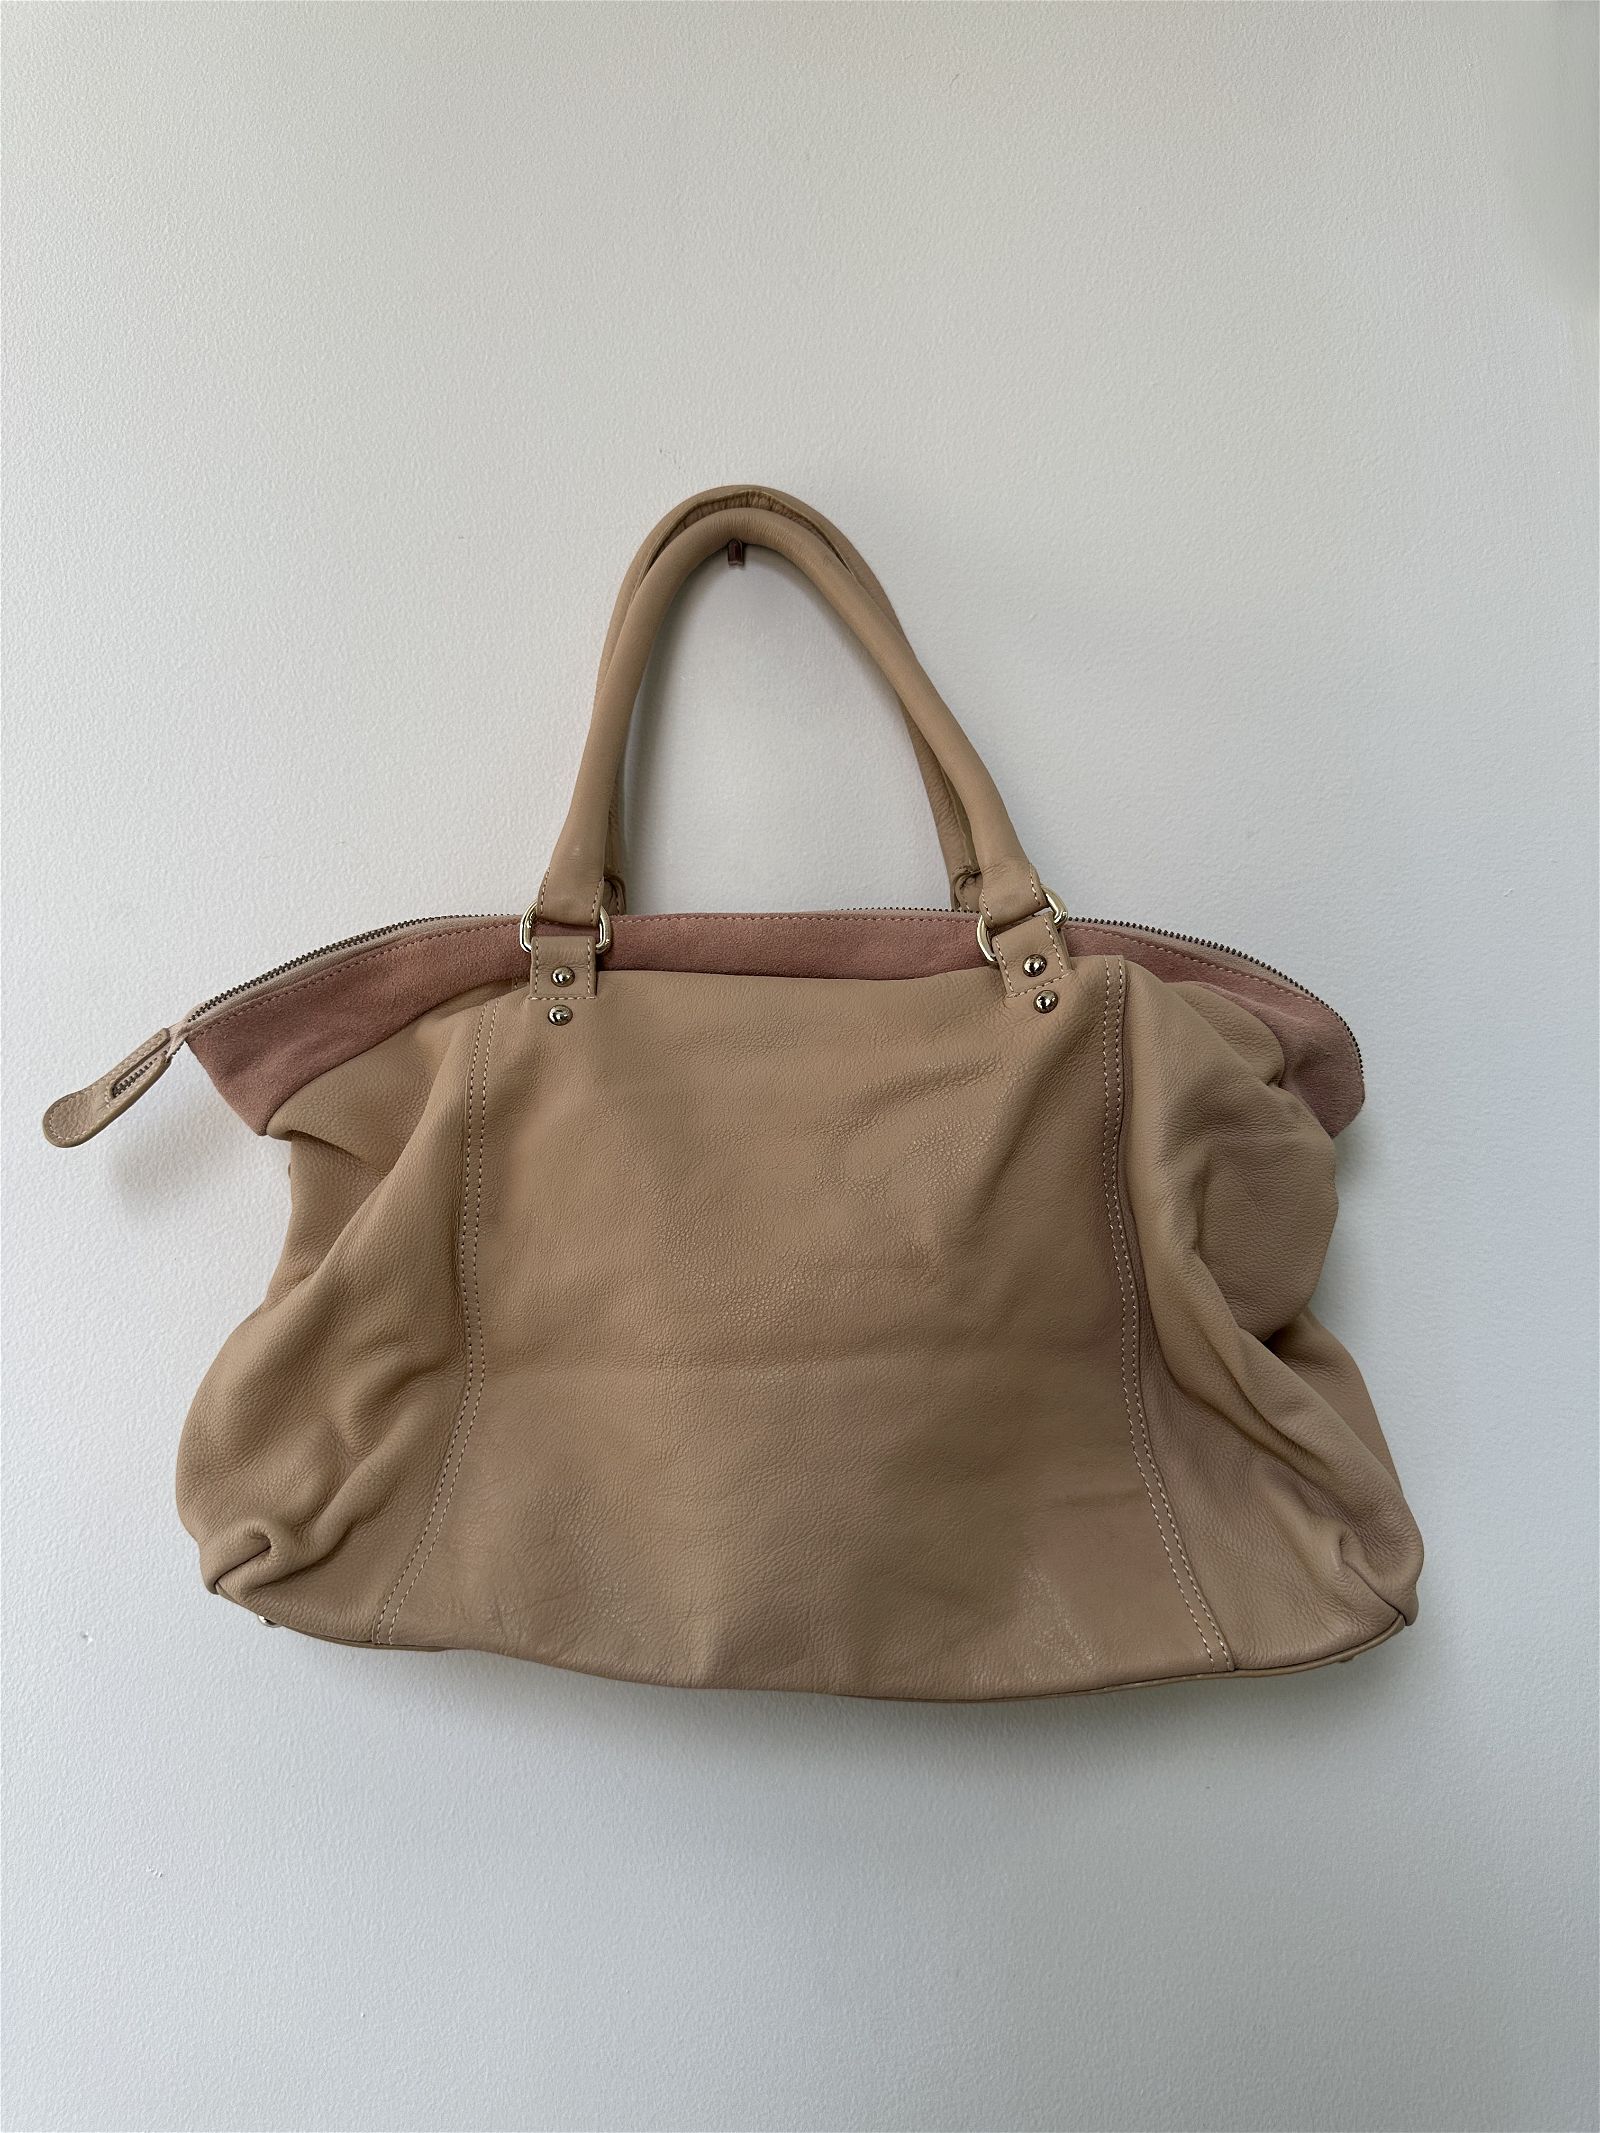 Witchery Taupe Leather Tote Bag